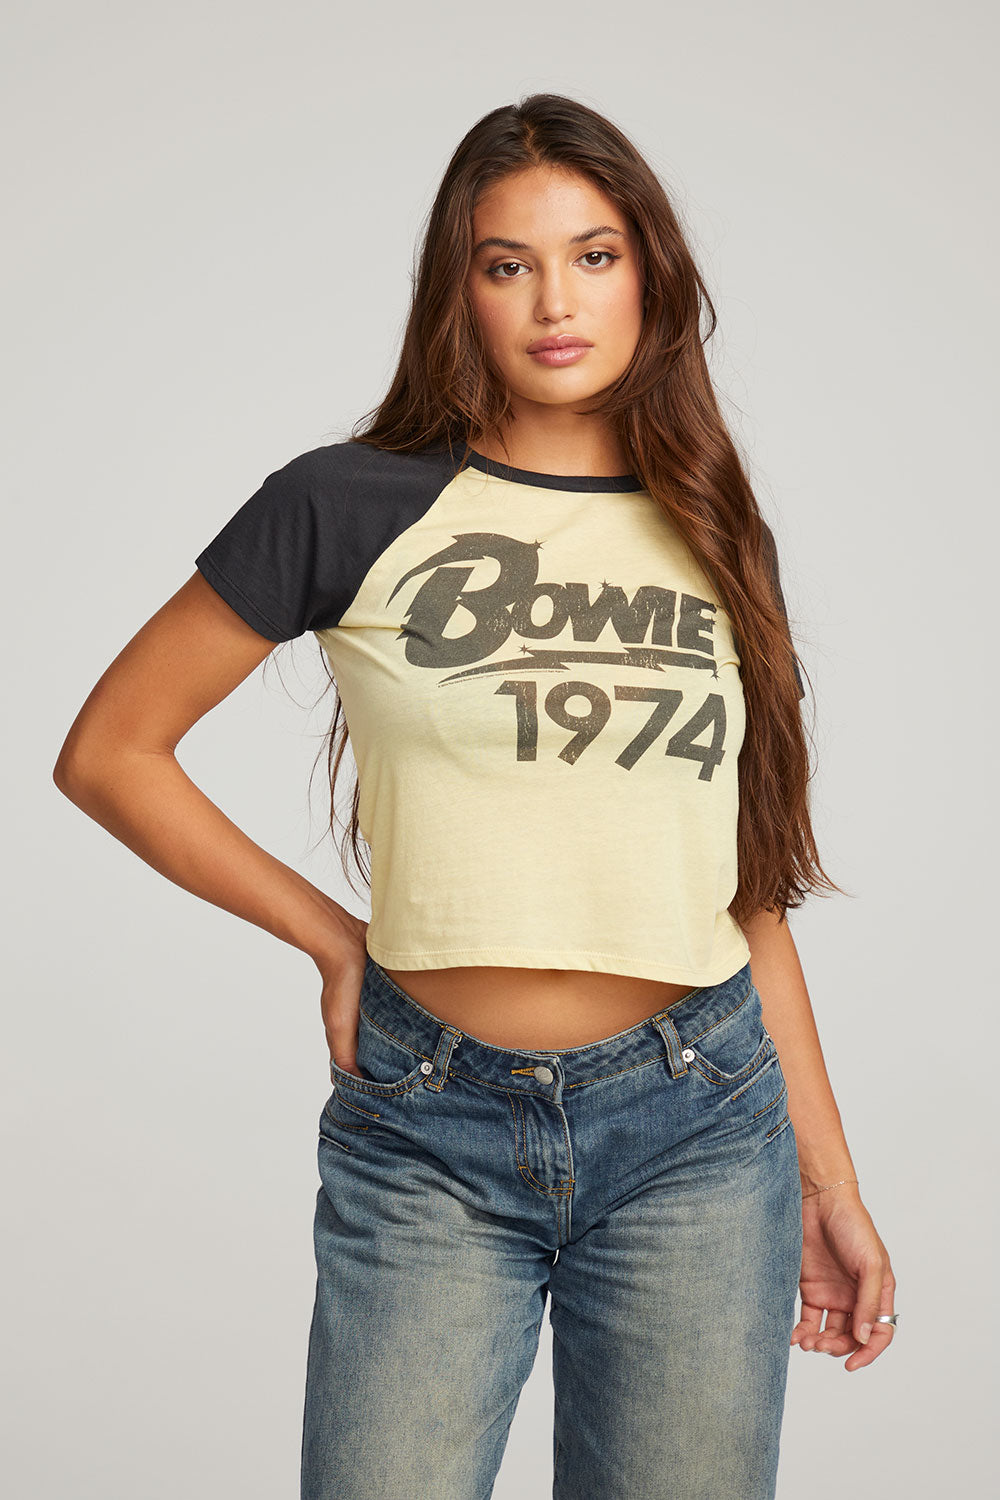 David Bowie 1974 Tee WOMENS chaserbrand